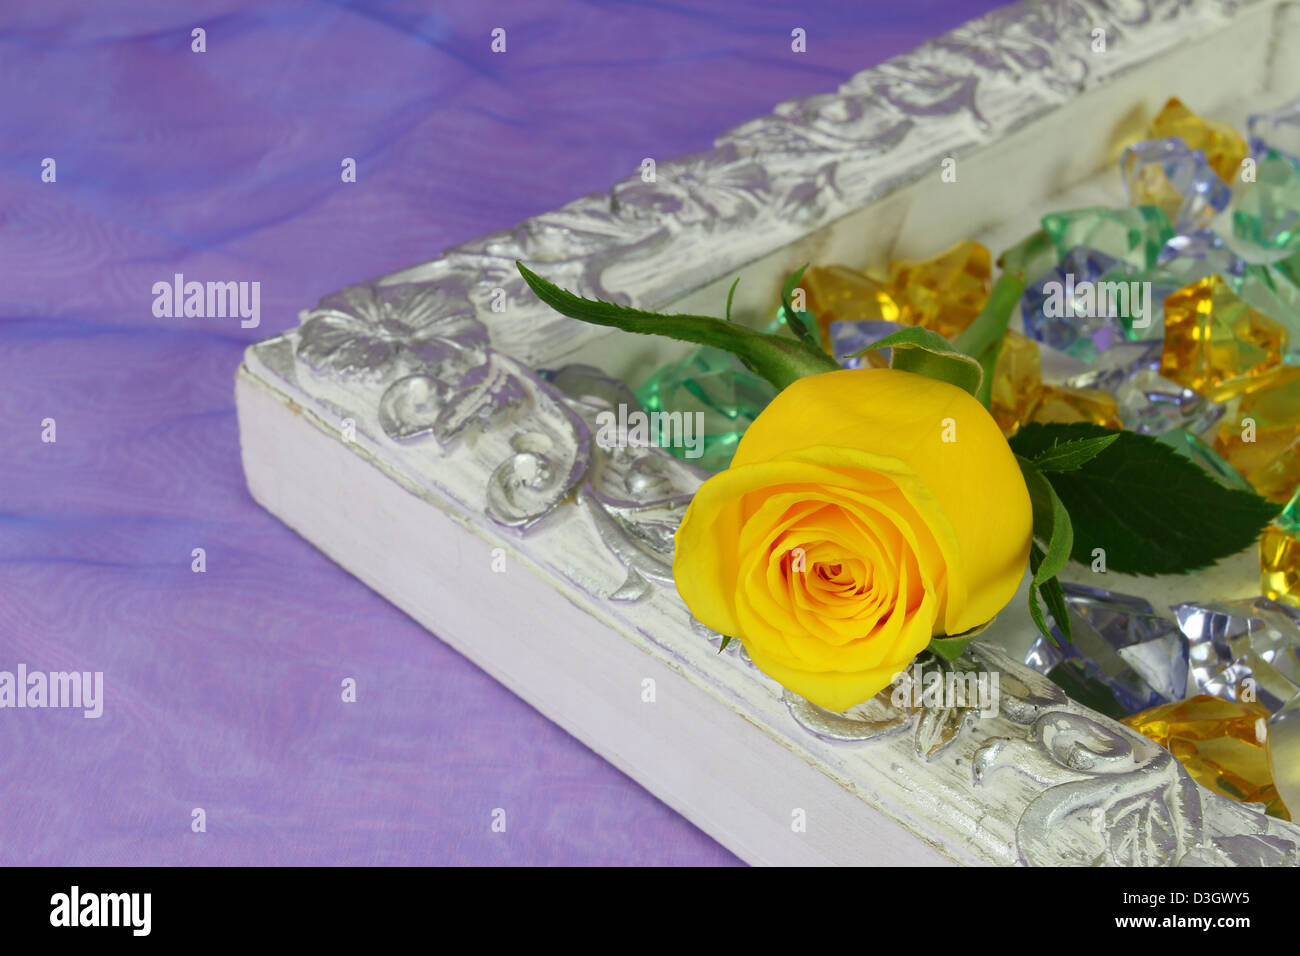 Vintage tray with yellow rose and crystals on purple background Stock Photo